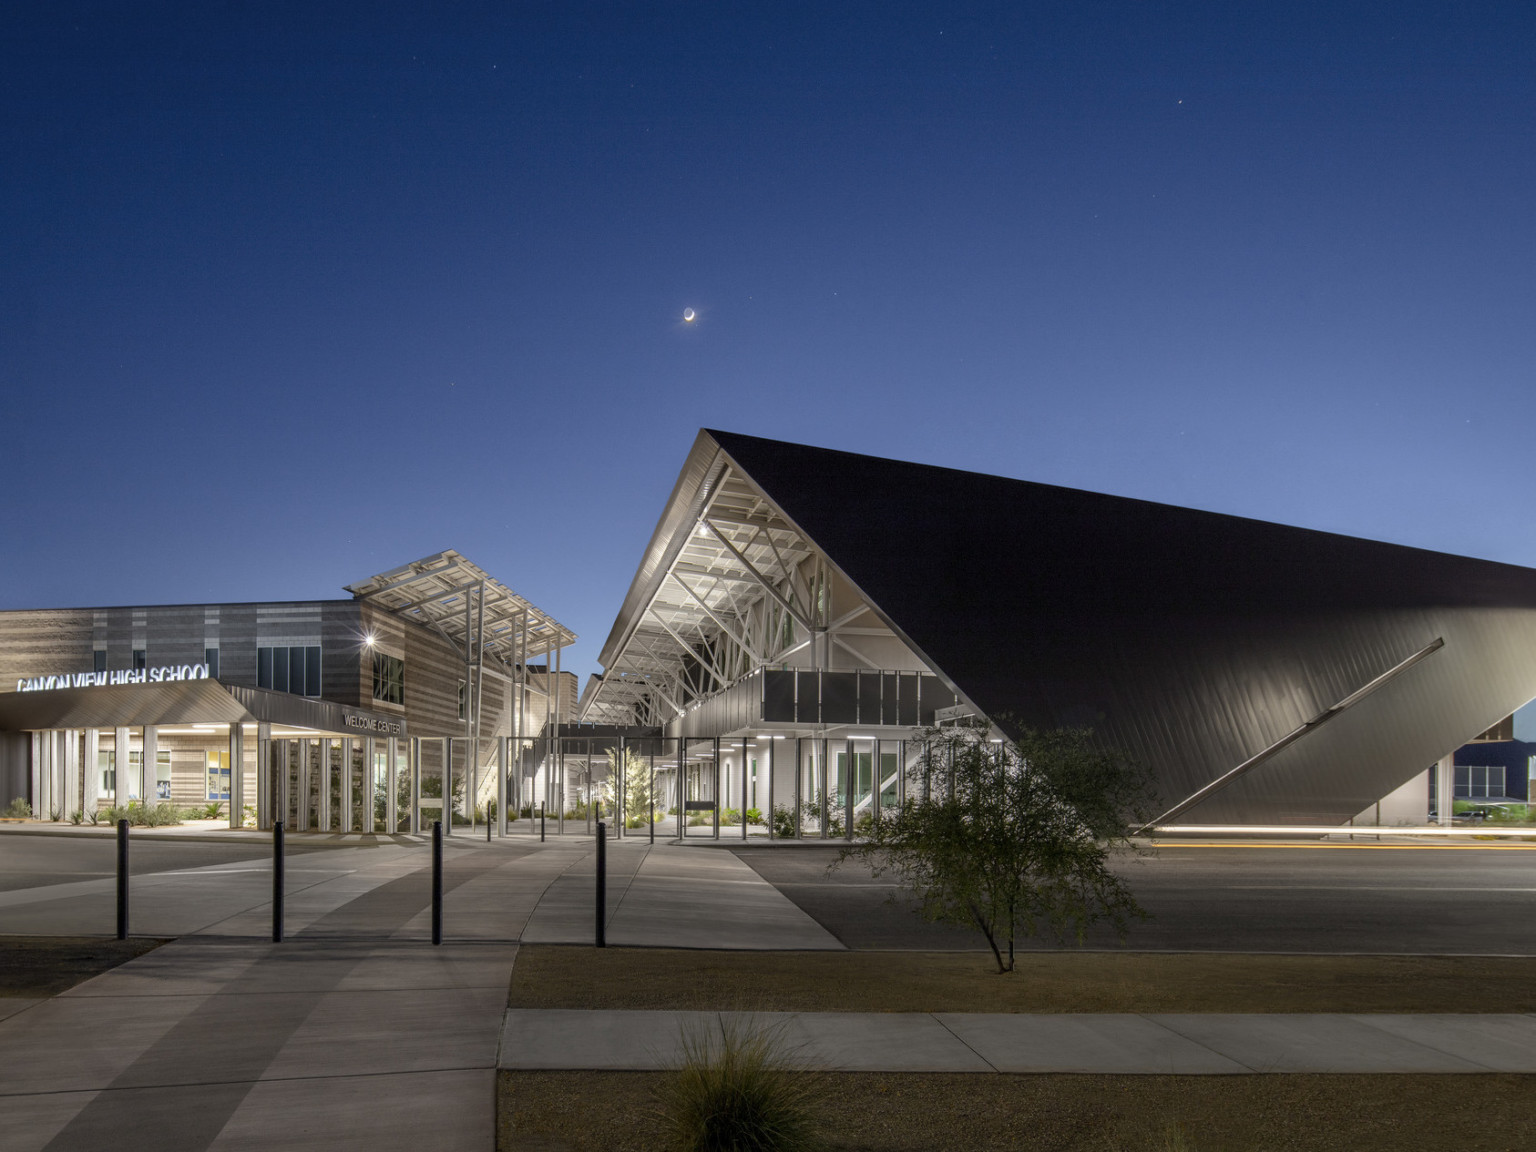 Canyon View High School campus is a modern steel building with exposed structural beams and solar canopies